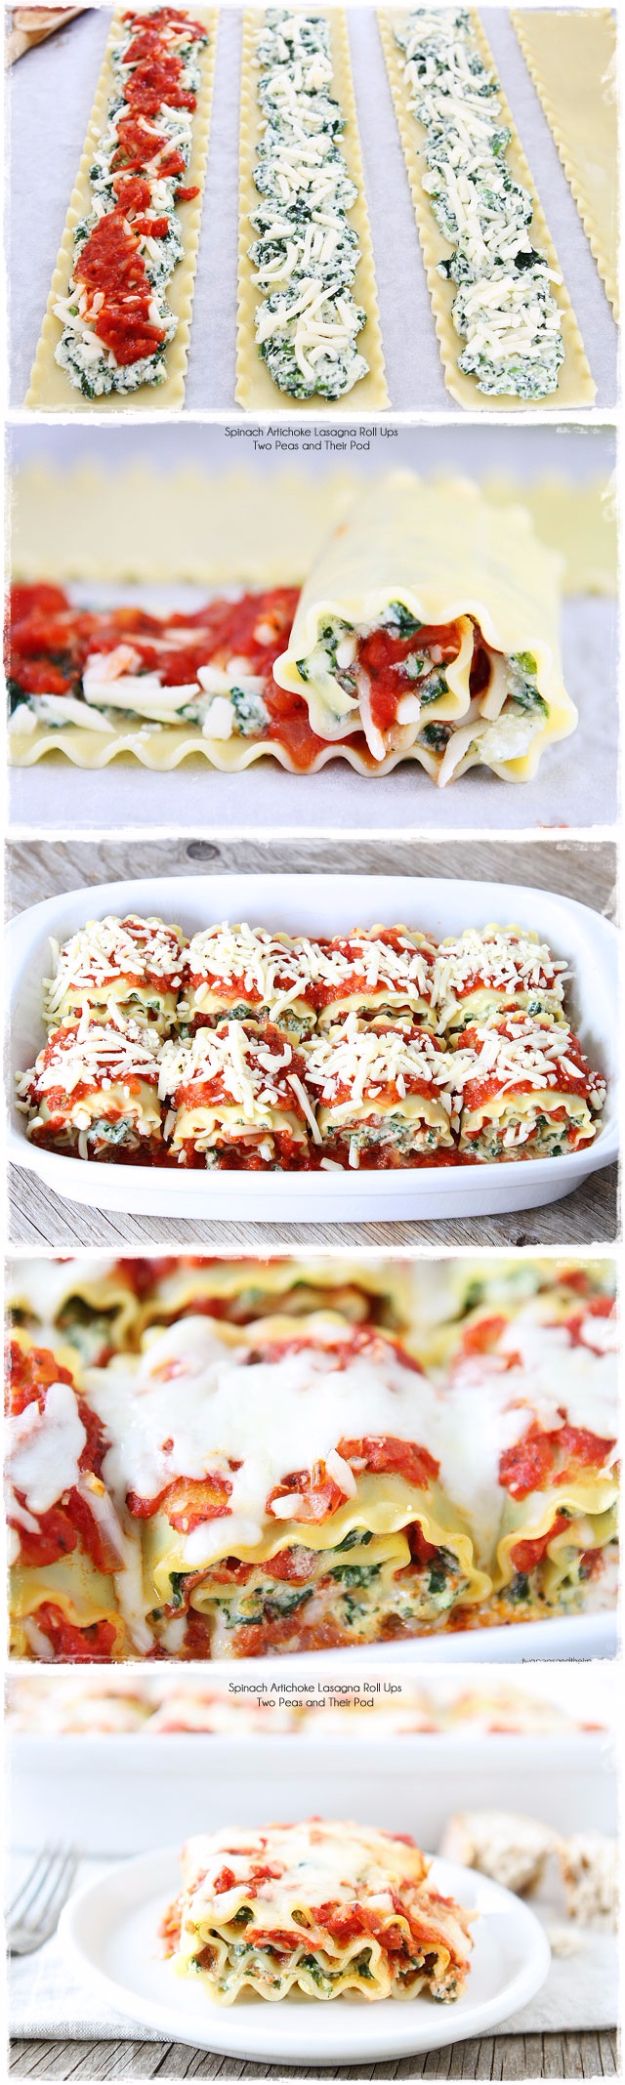 Best Easter Dinner Recipes - Spinach Artichoke Lasagna Roll Ups - Easy Recipe Ideas for Easter Dinners and Holiday Meals for Families - Side Dishes, Slow Cooker Recipe Tutorials, Main Courses, Traditional Meat, Vegetable and Dessert Ideas - Desserts, Pies, Cakes, Ham and Beef, Lamb - DIY Projects and Crafts by DIY JOY 